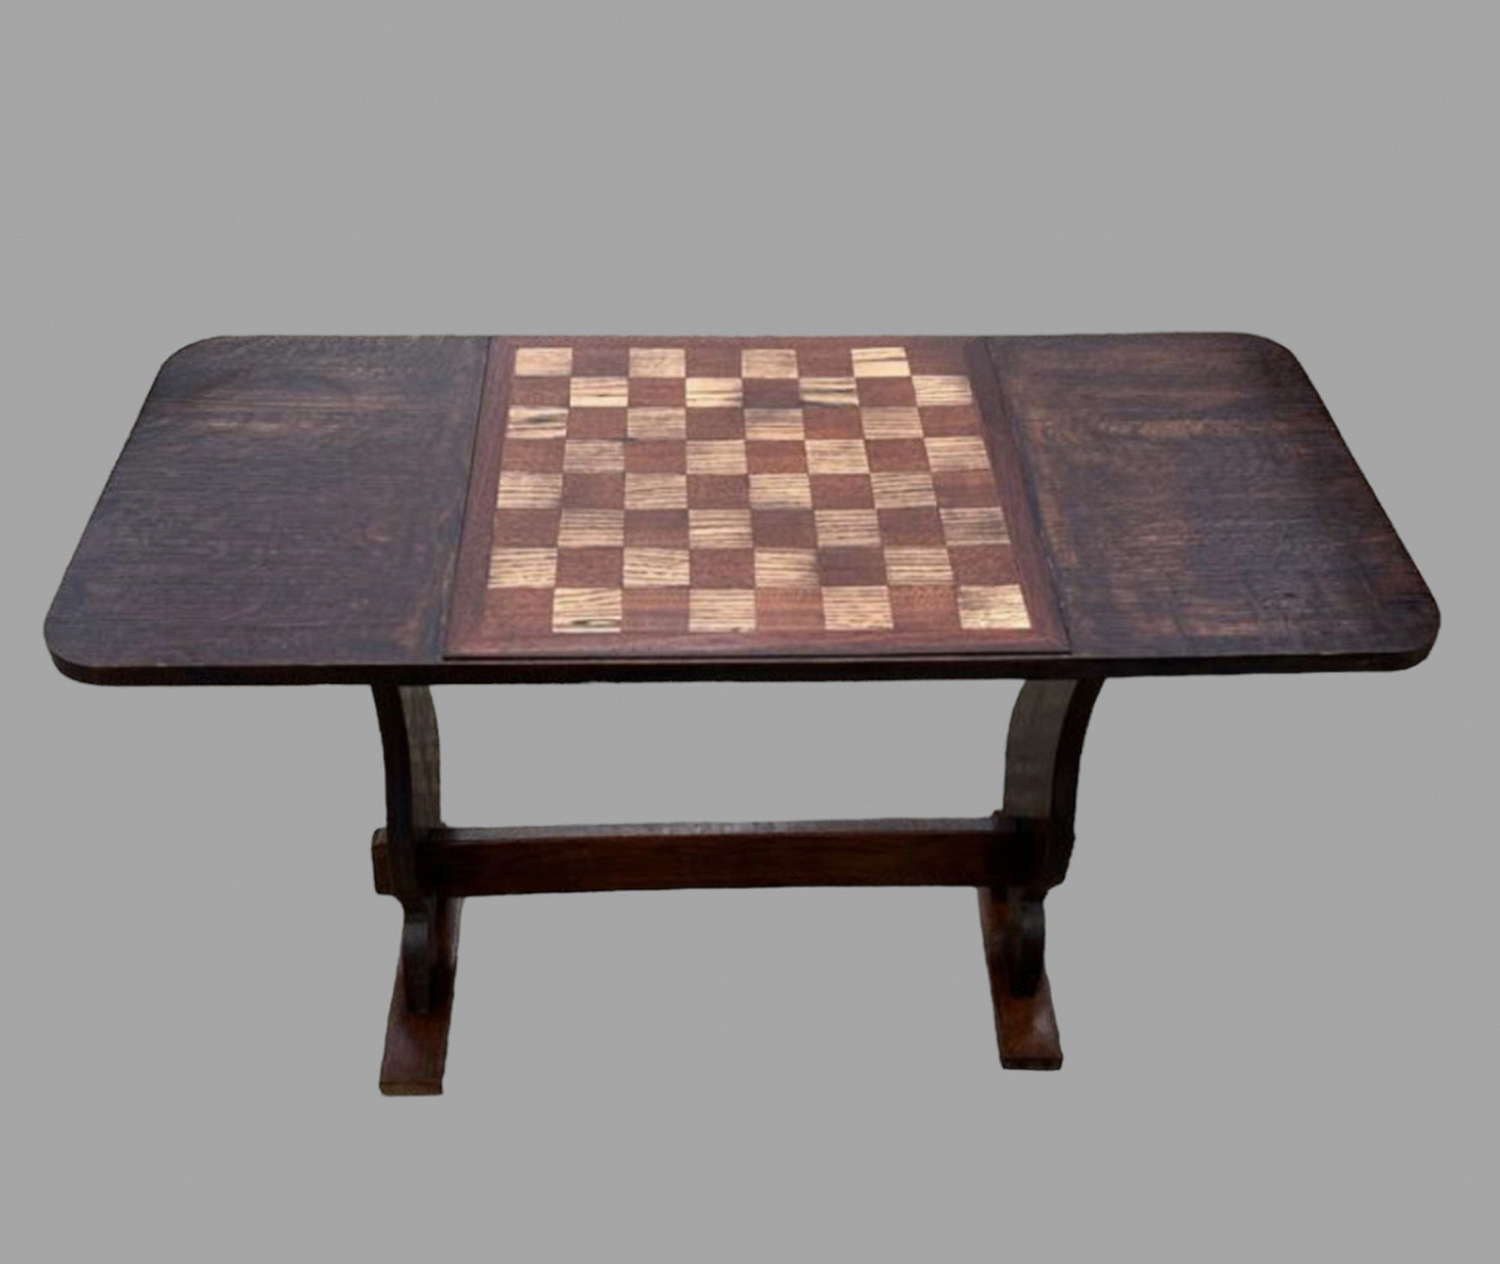 A Hand Made Mid Century Games Table